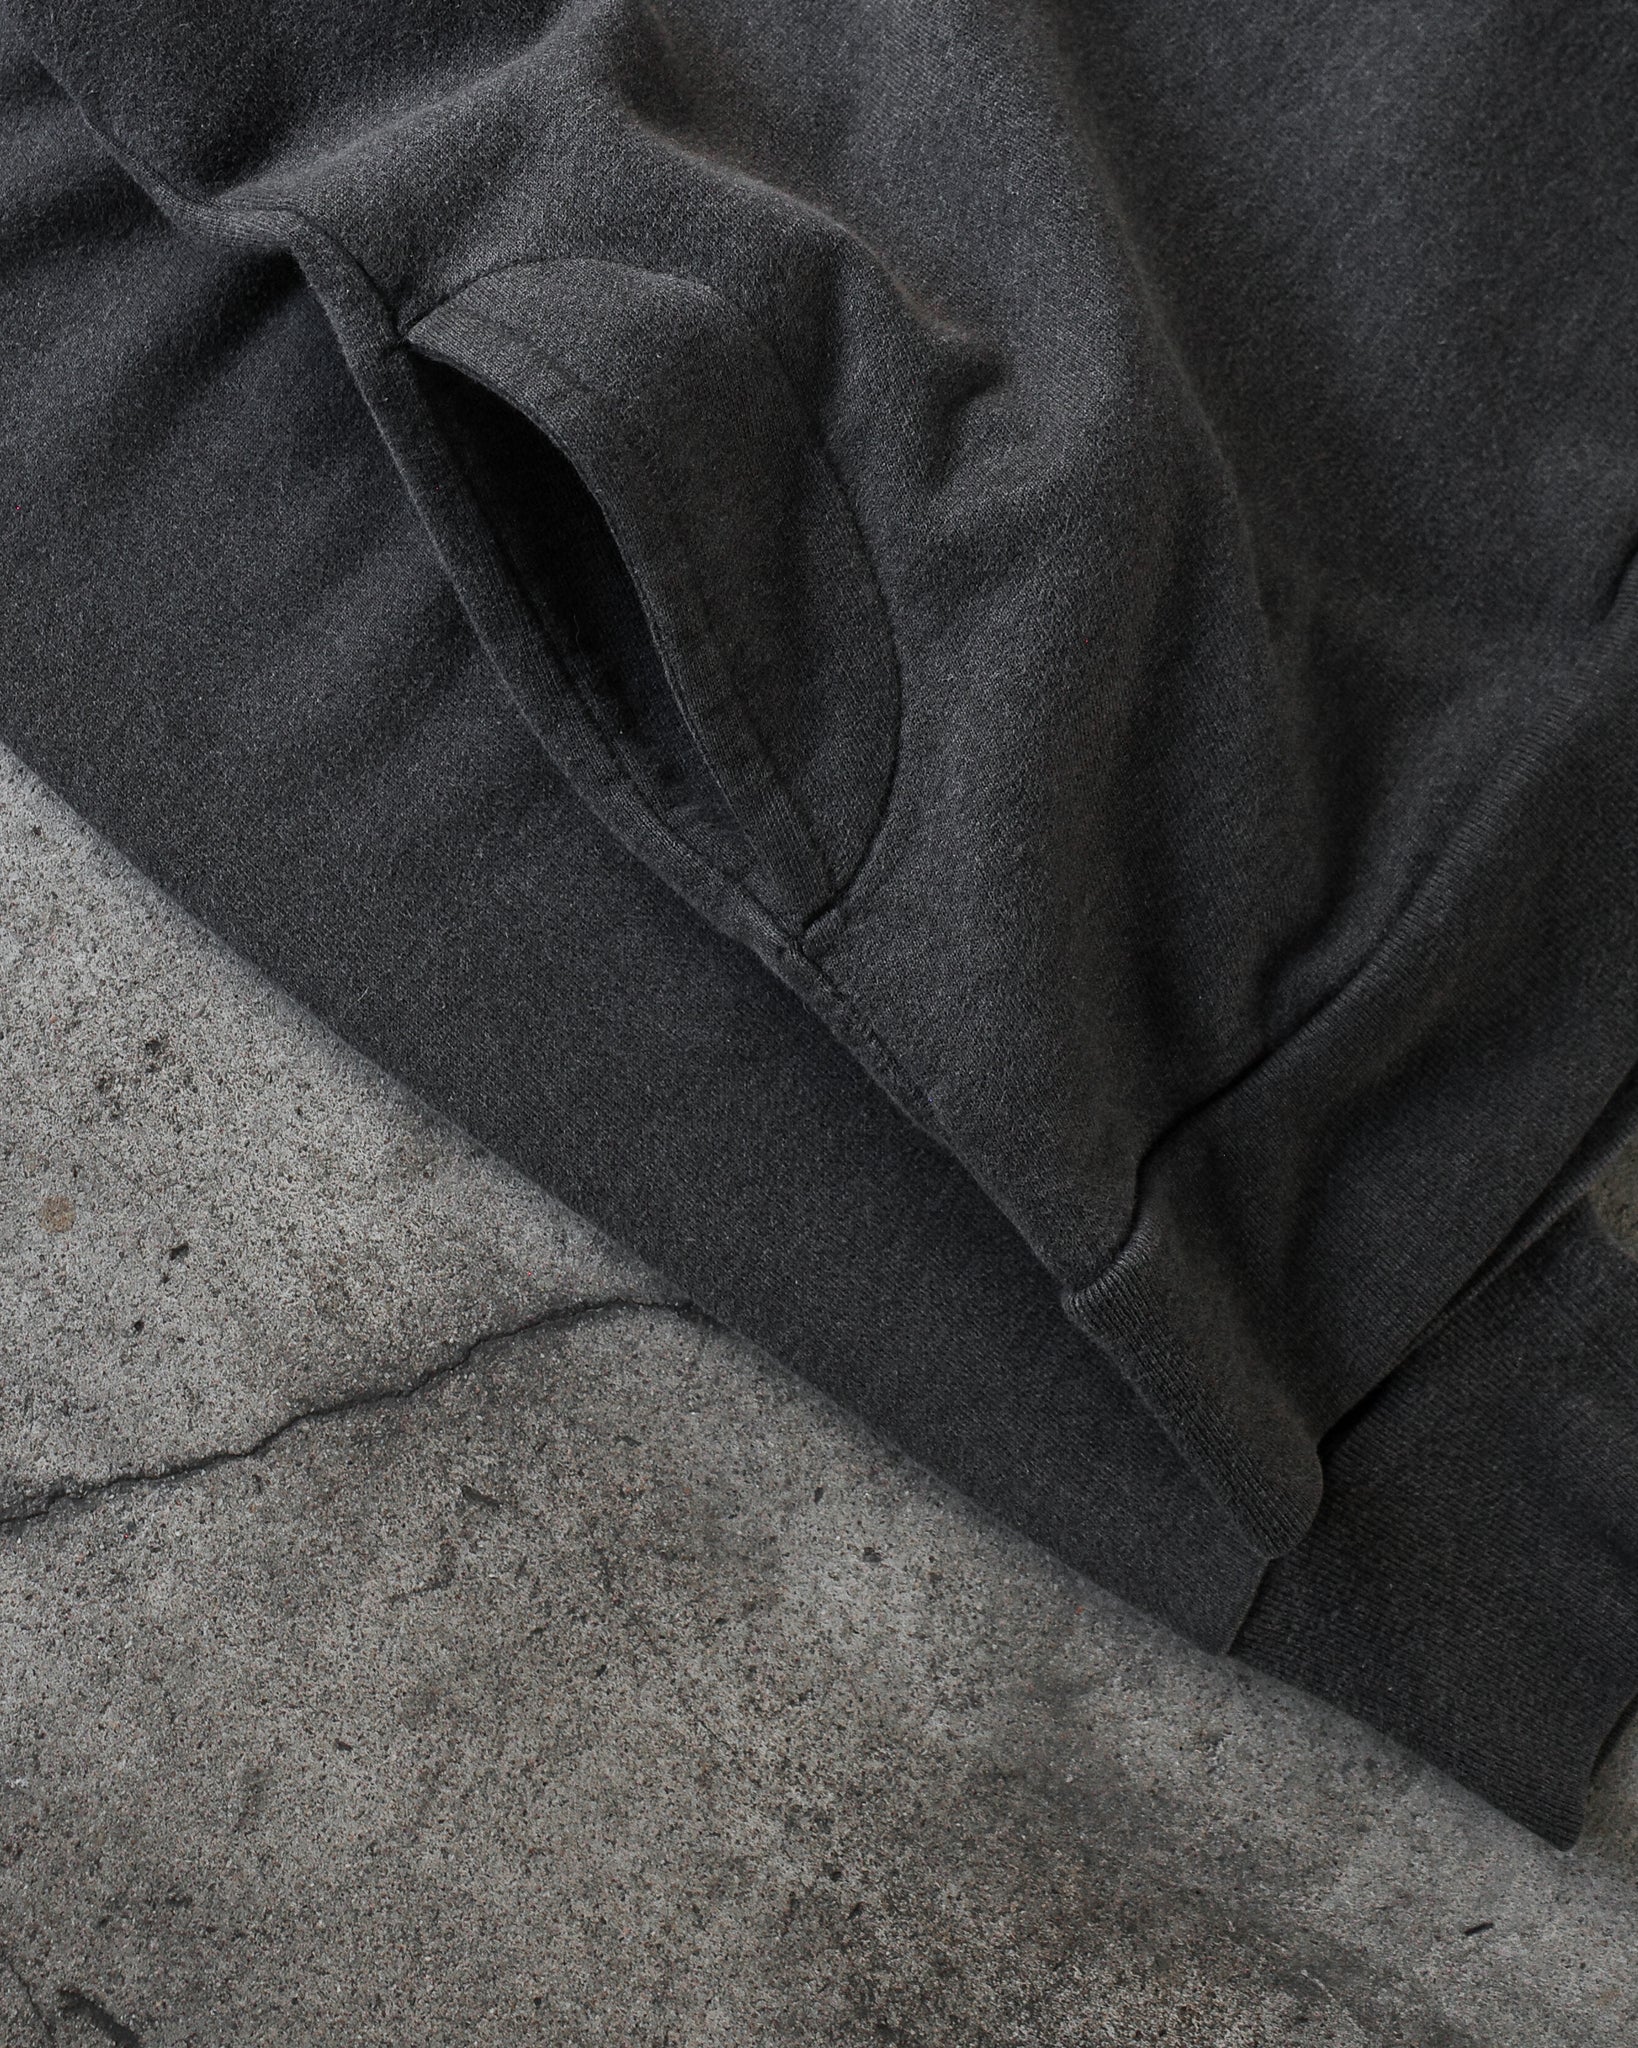 Undercover SS15 "See No Evil" Sweatshirt